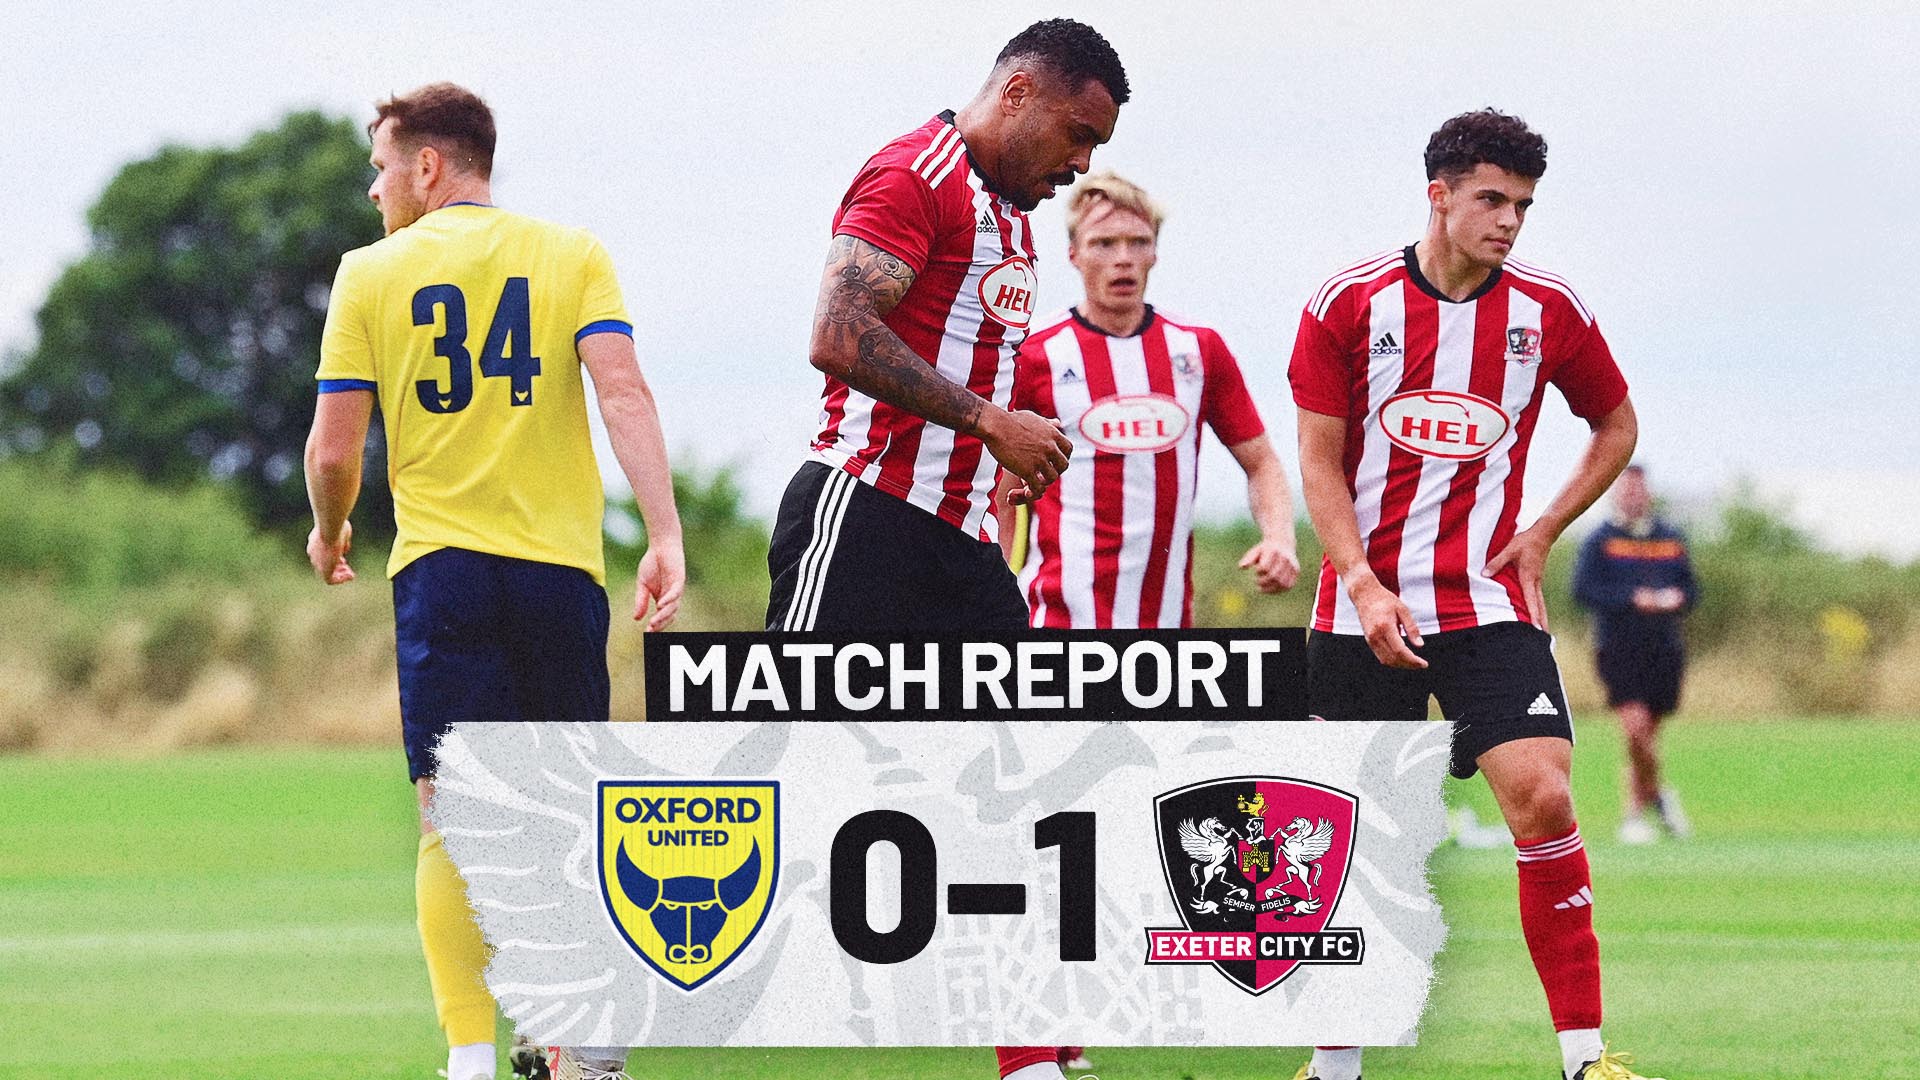 Oxford United match report image